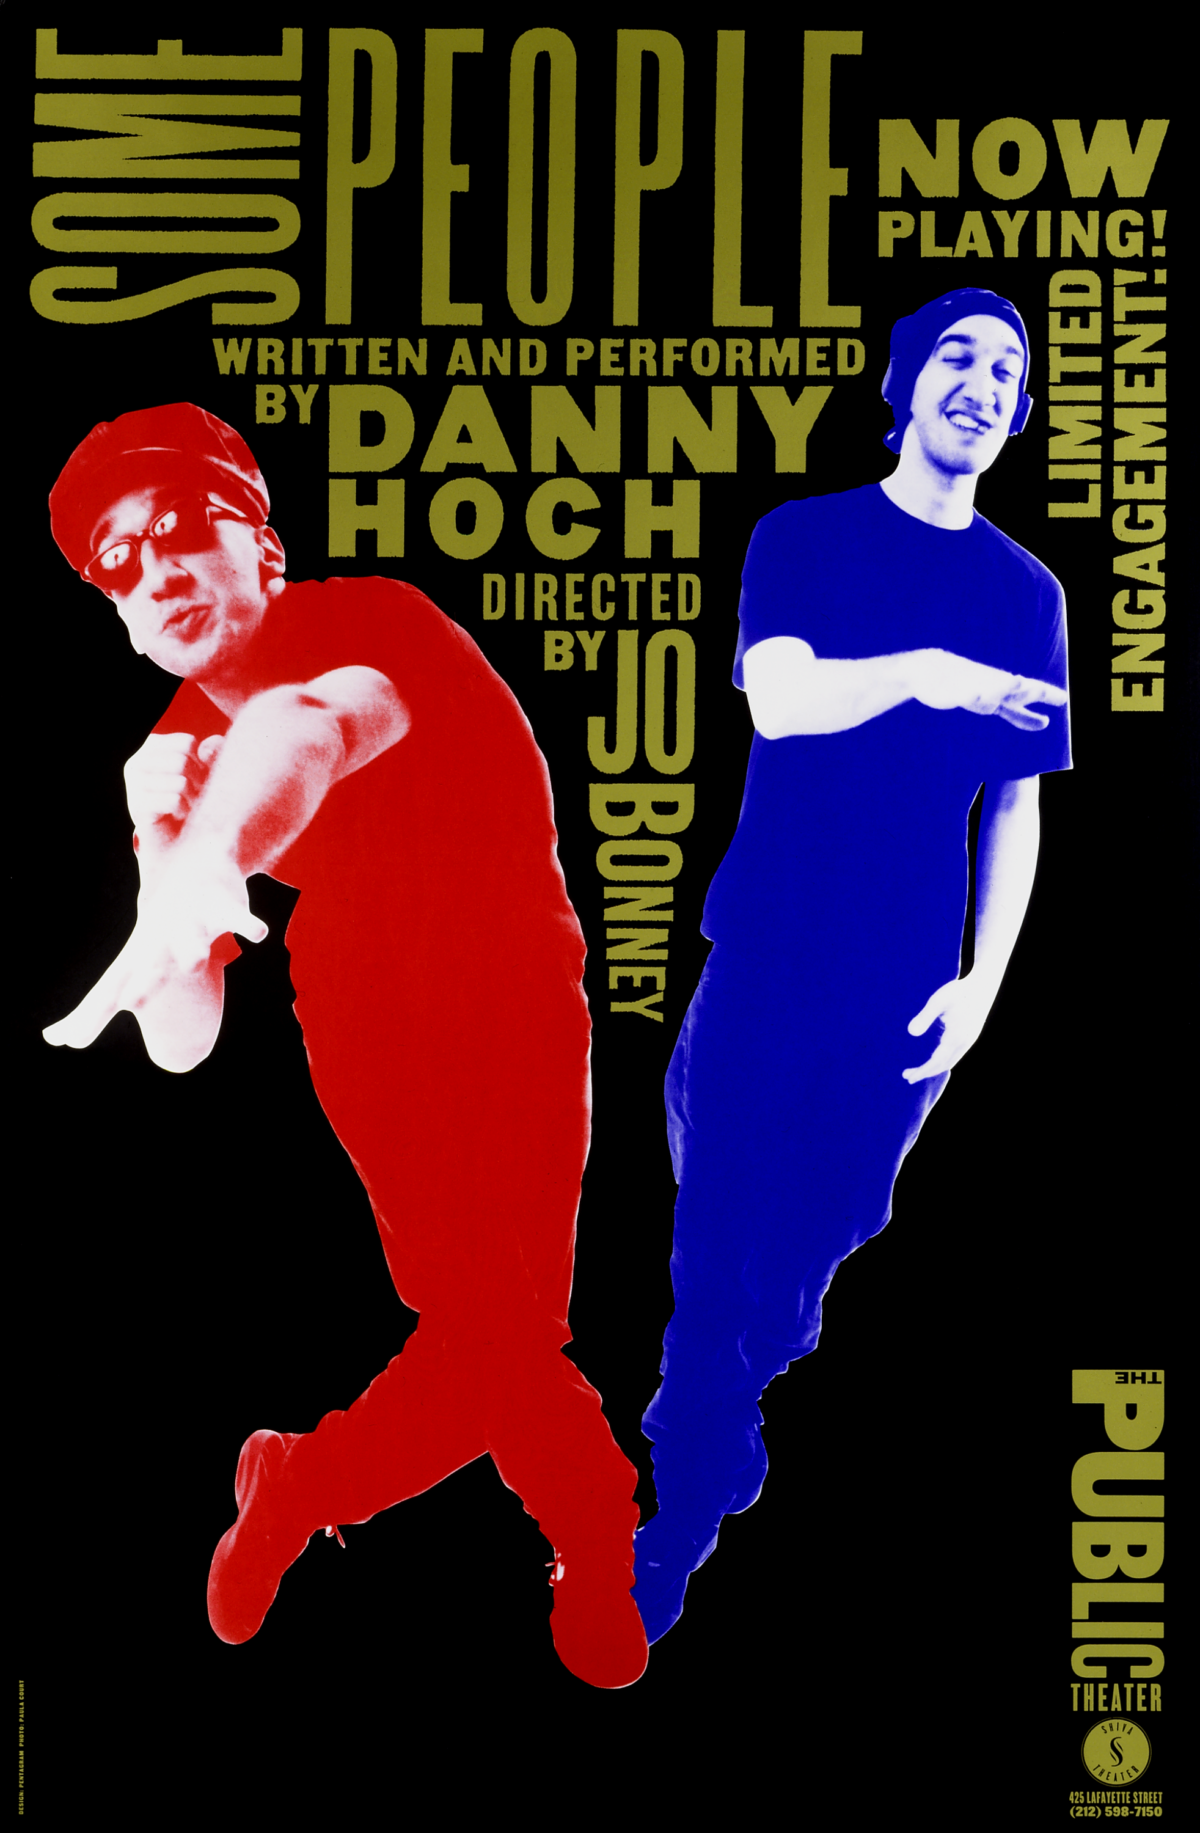 A poster of two young men wearing street clothes; one dressed in red, the other in blue, dancing on a black background.